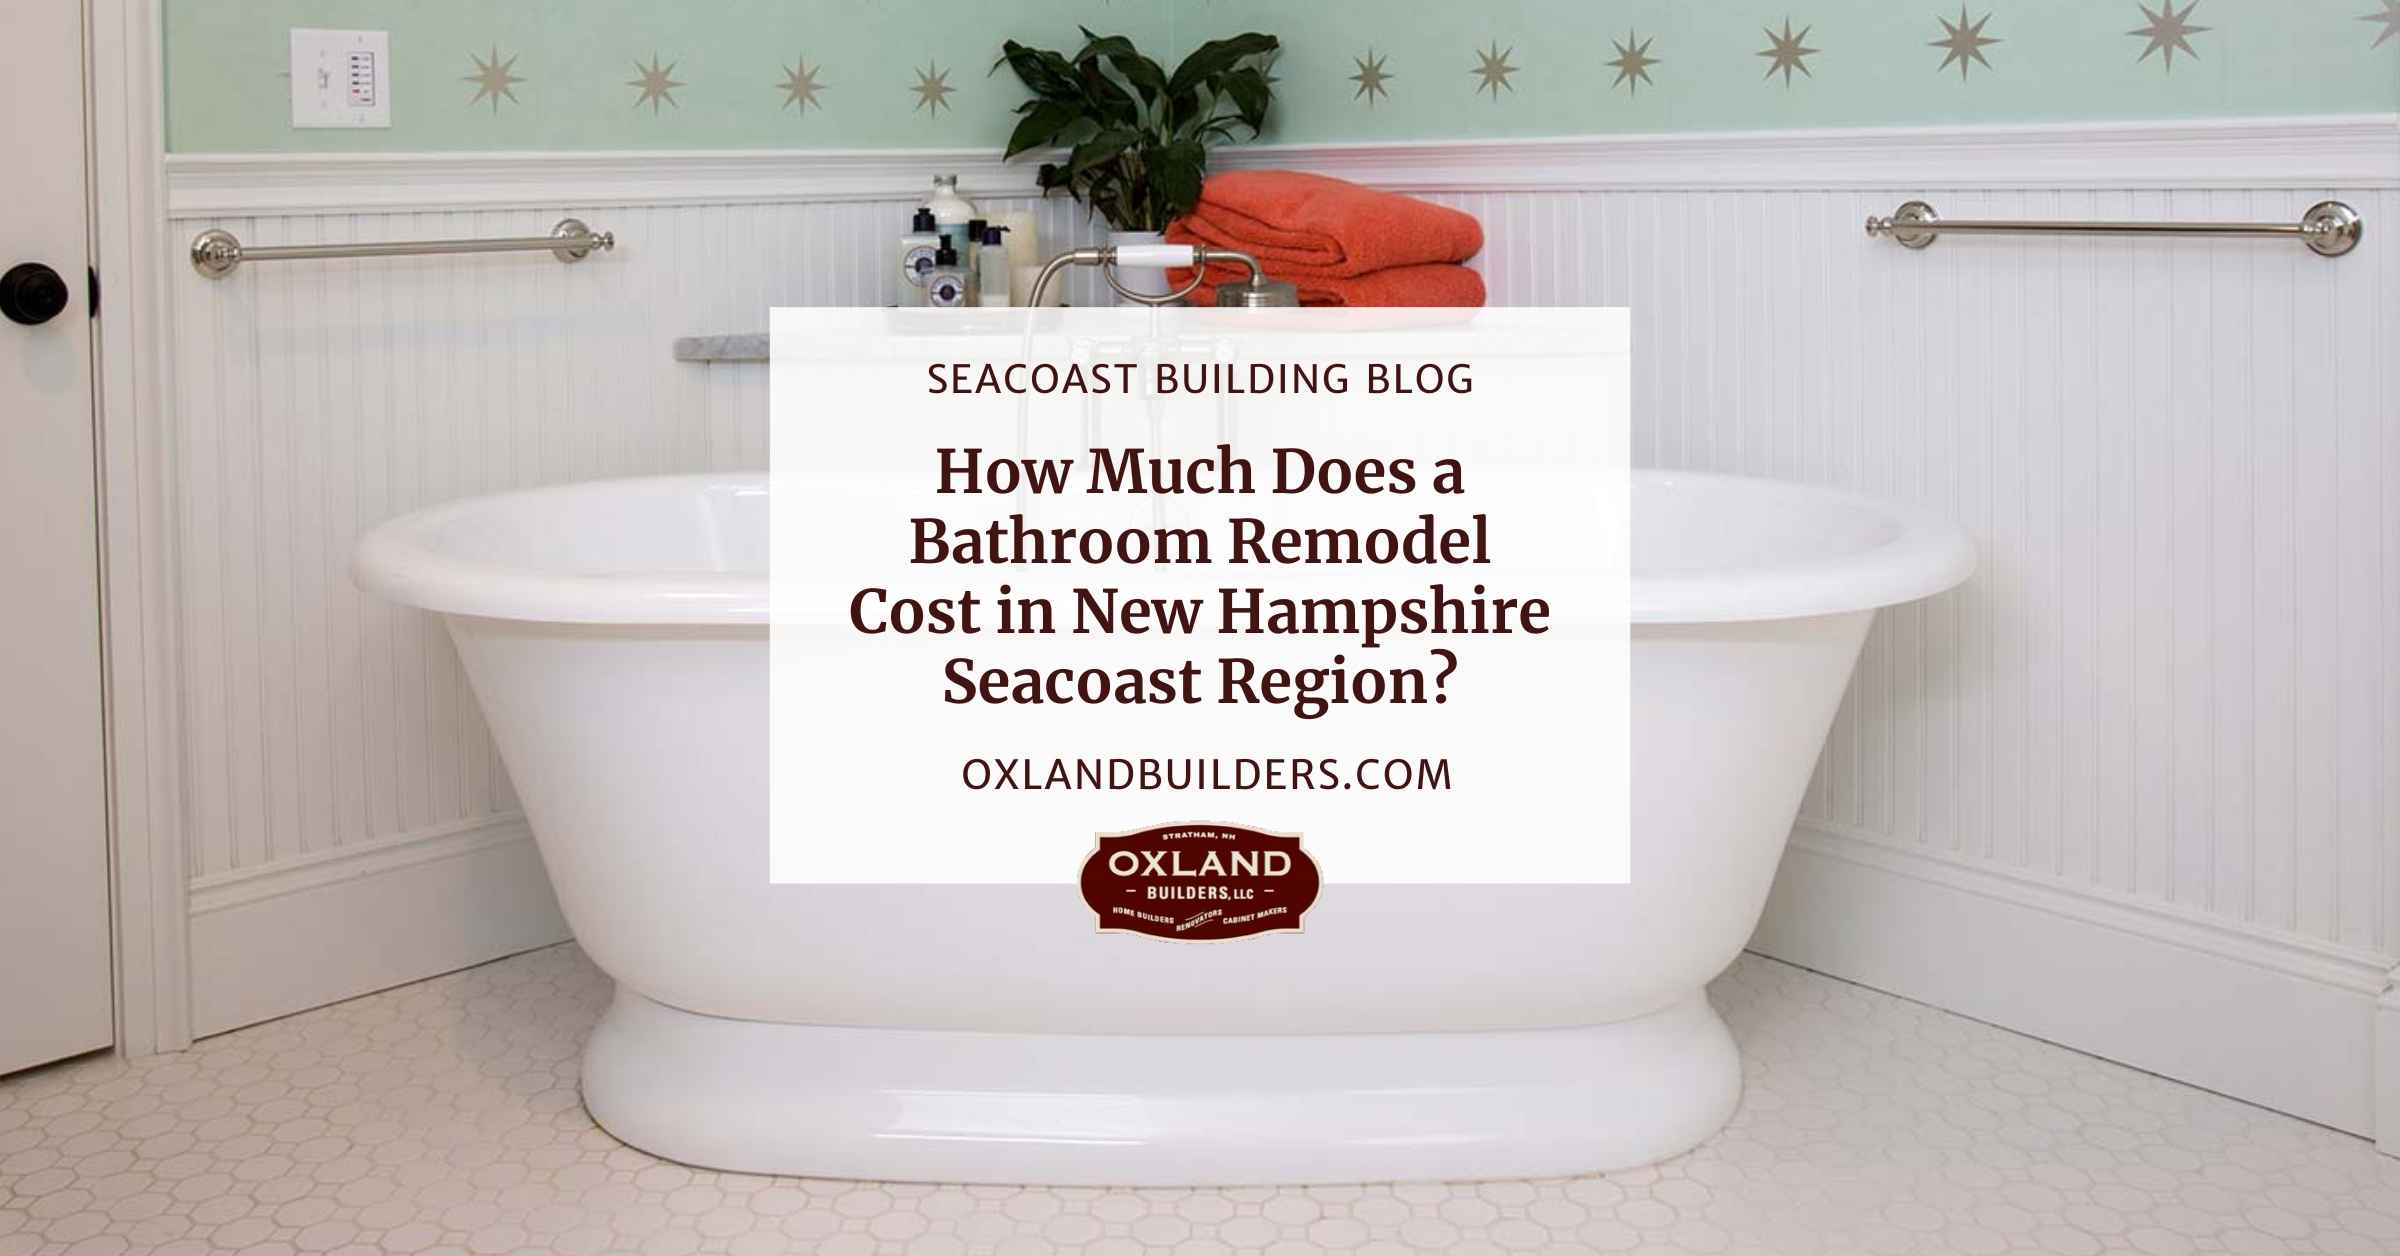 How Much Does a Bathroom Remodel Cost in New Hampshire Seacoast Area?